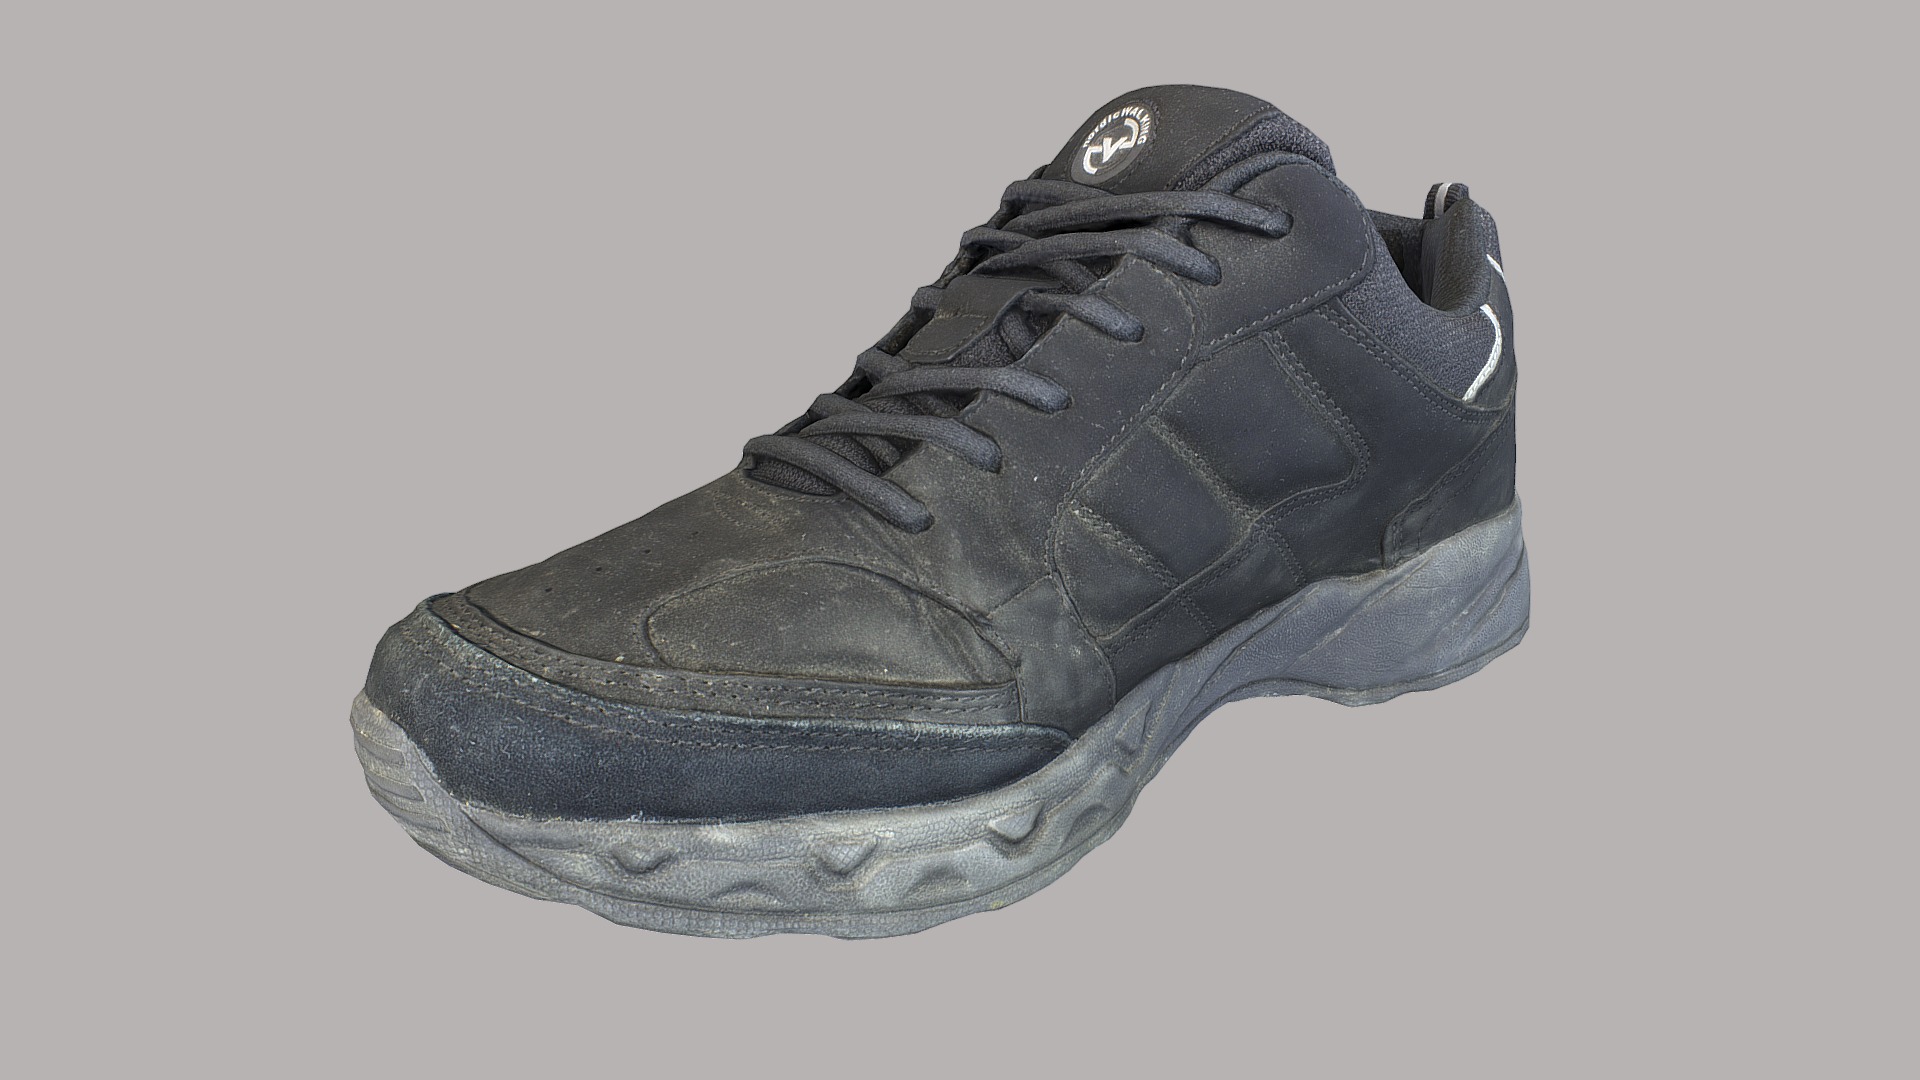 3D model Worn sneaker shoe - This is a 3D model of the Worn sneaker shoe. The 3D model is about a black shoe with a white background.